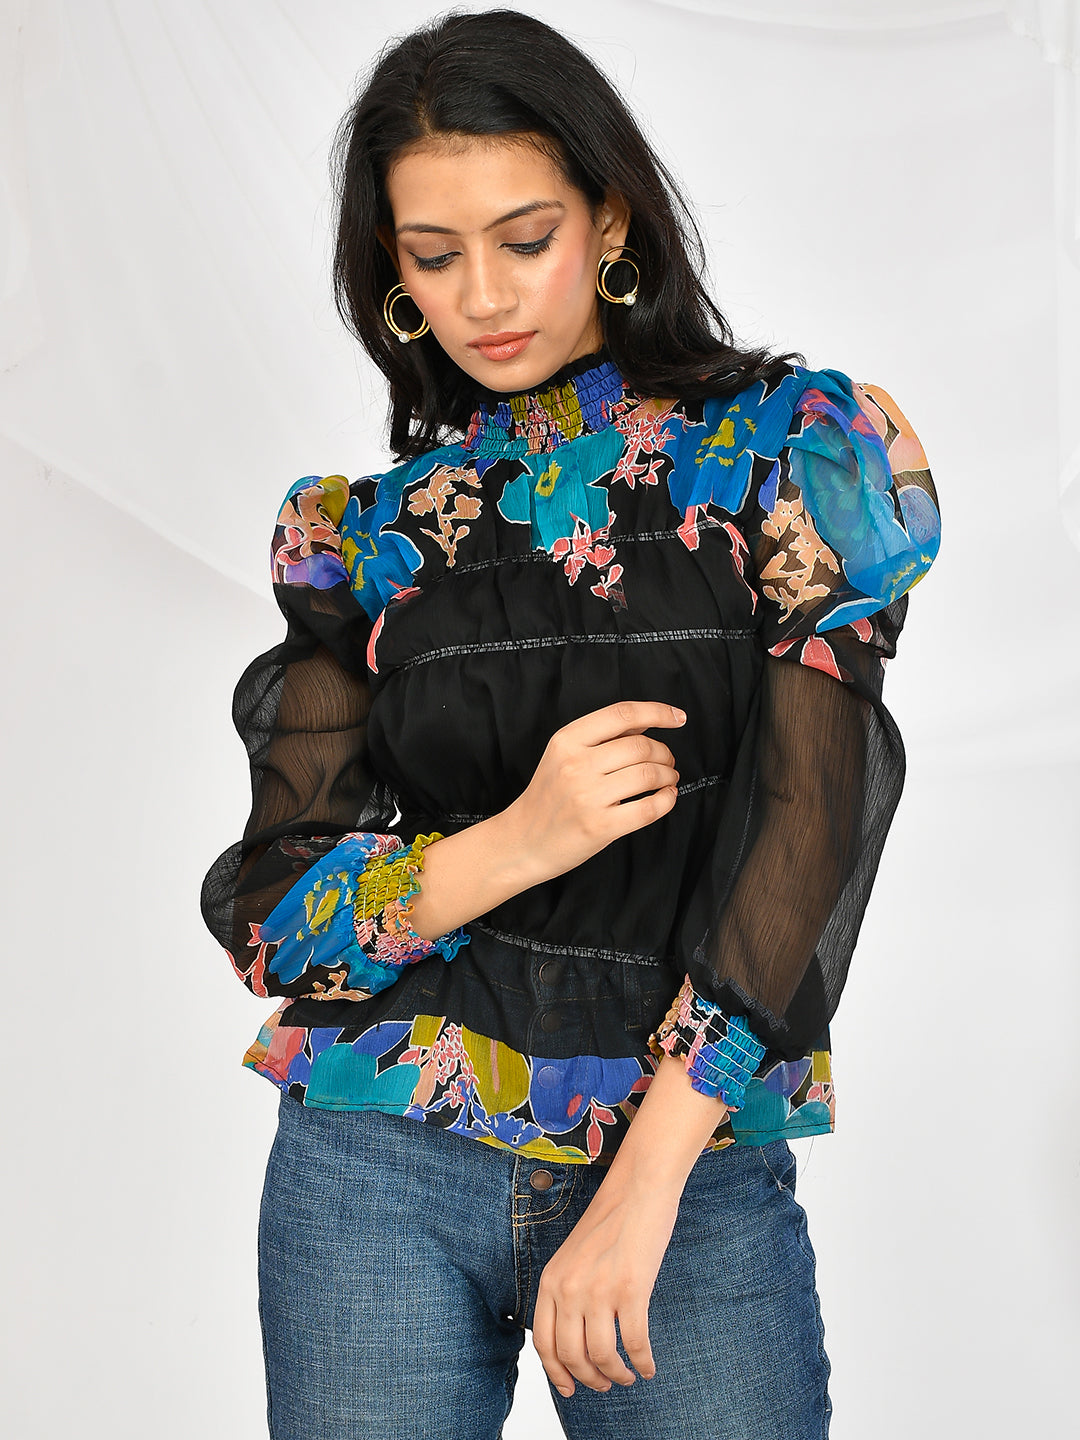 This Floral Printed Chiffon High Neck Top is the perfect addition to any wardrobe. Made from high quality chiffon fabric, it is lightweight and comfortable to wear. The floral print adds a touch of femininity, while the high neck design adds a touch of elegance. Perfect for girls and women of all ages, this top is versatile and stylish for any occasion.